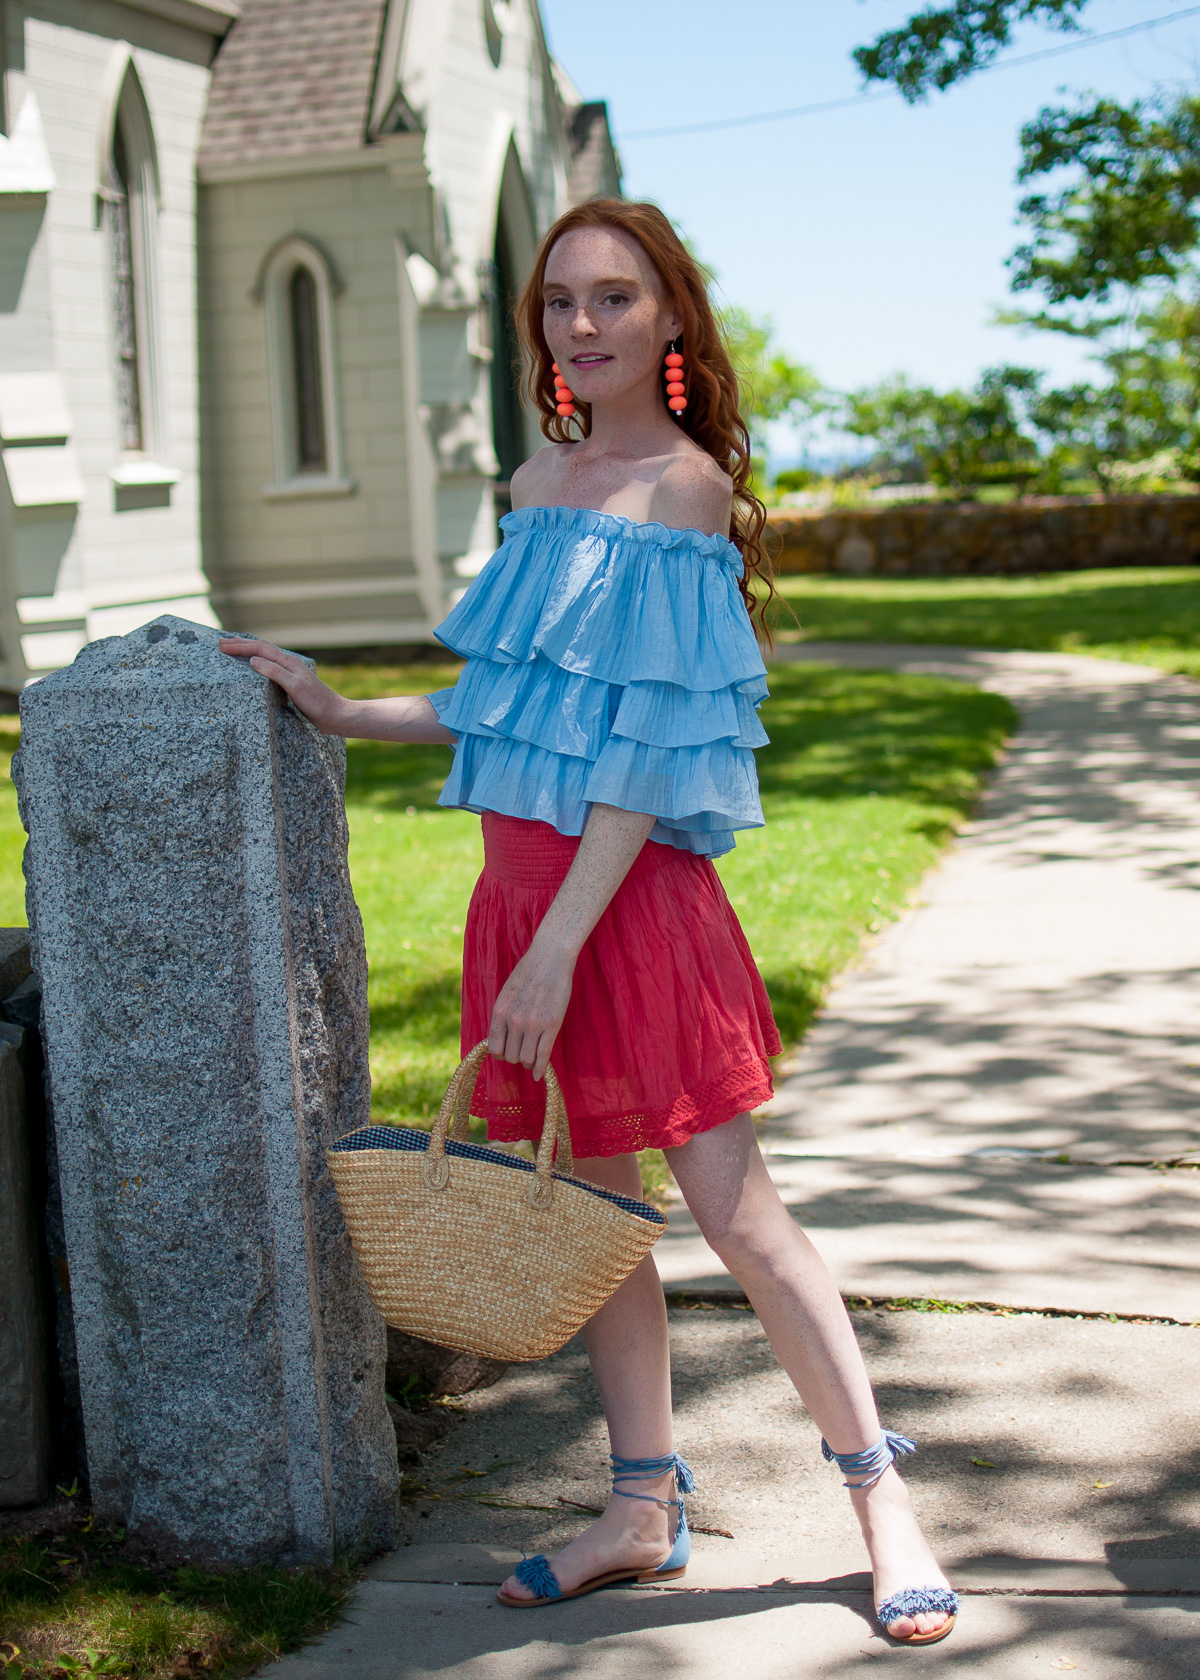 ruffled Sweet Wanderer off the shoulder top with Express skirt and Steeve Madden ankle tie sandals